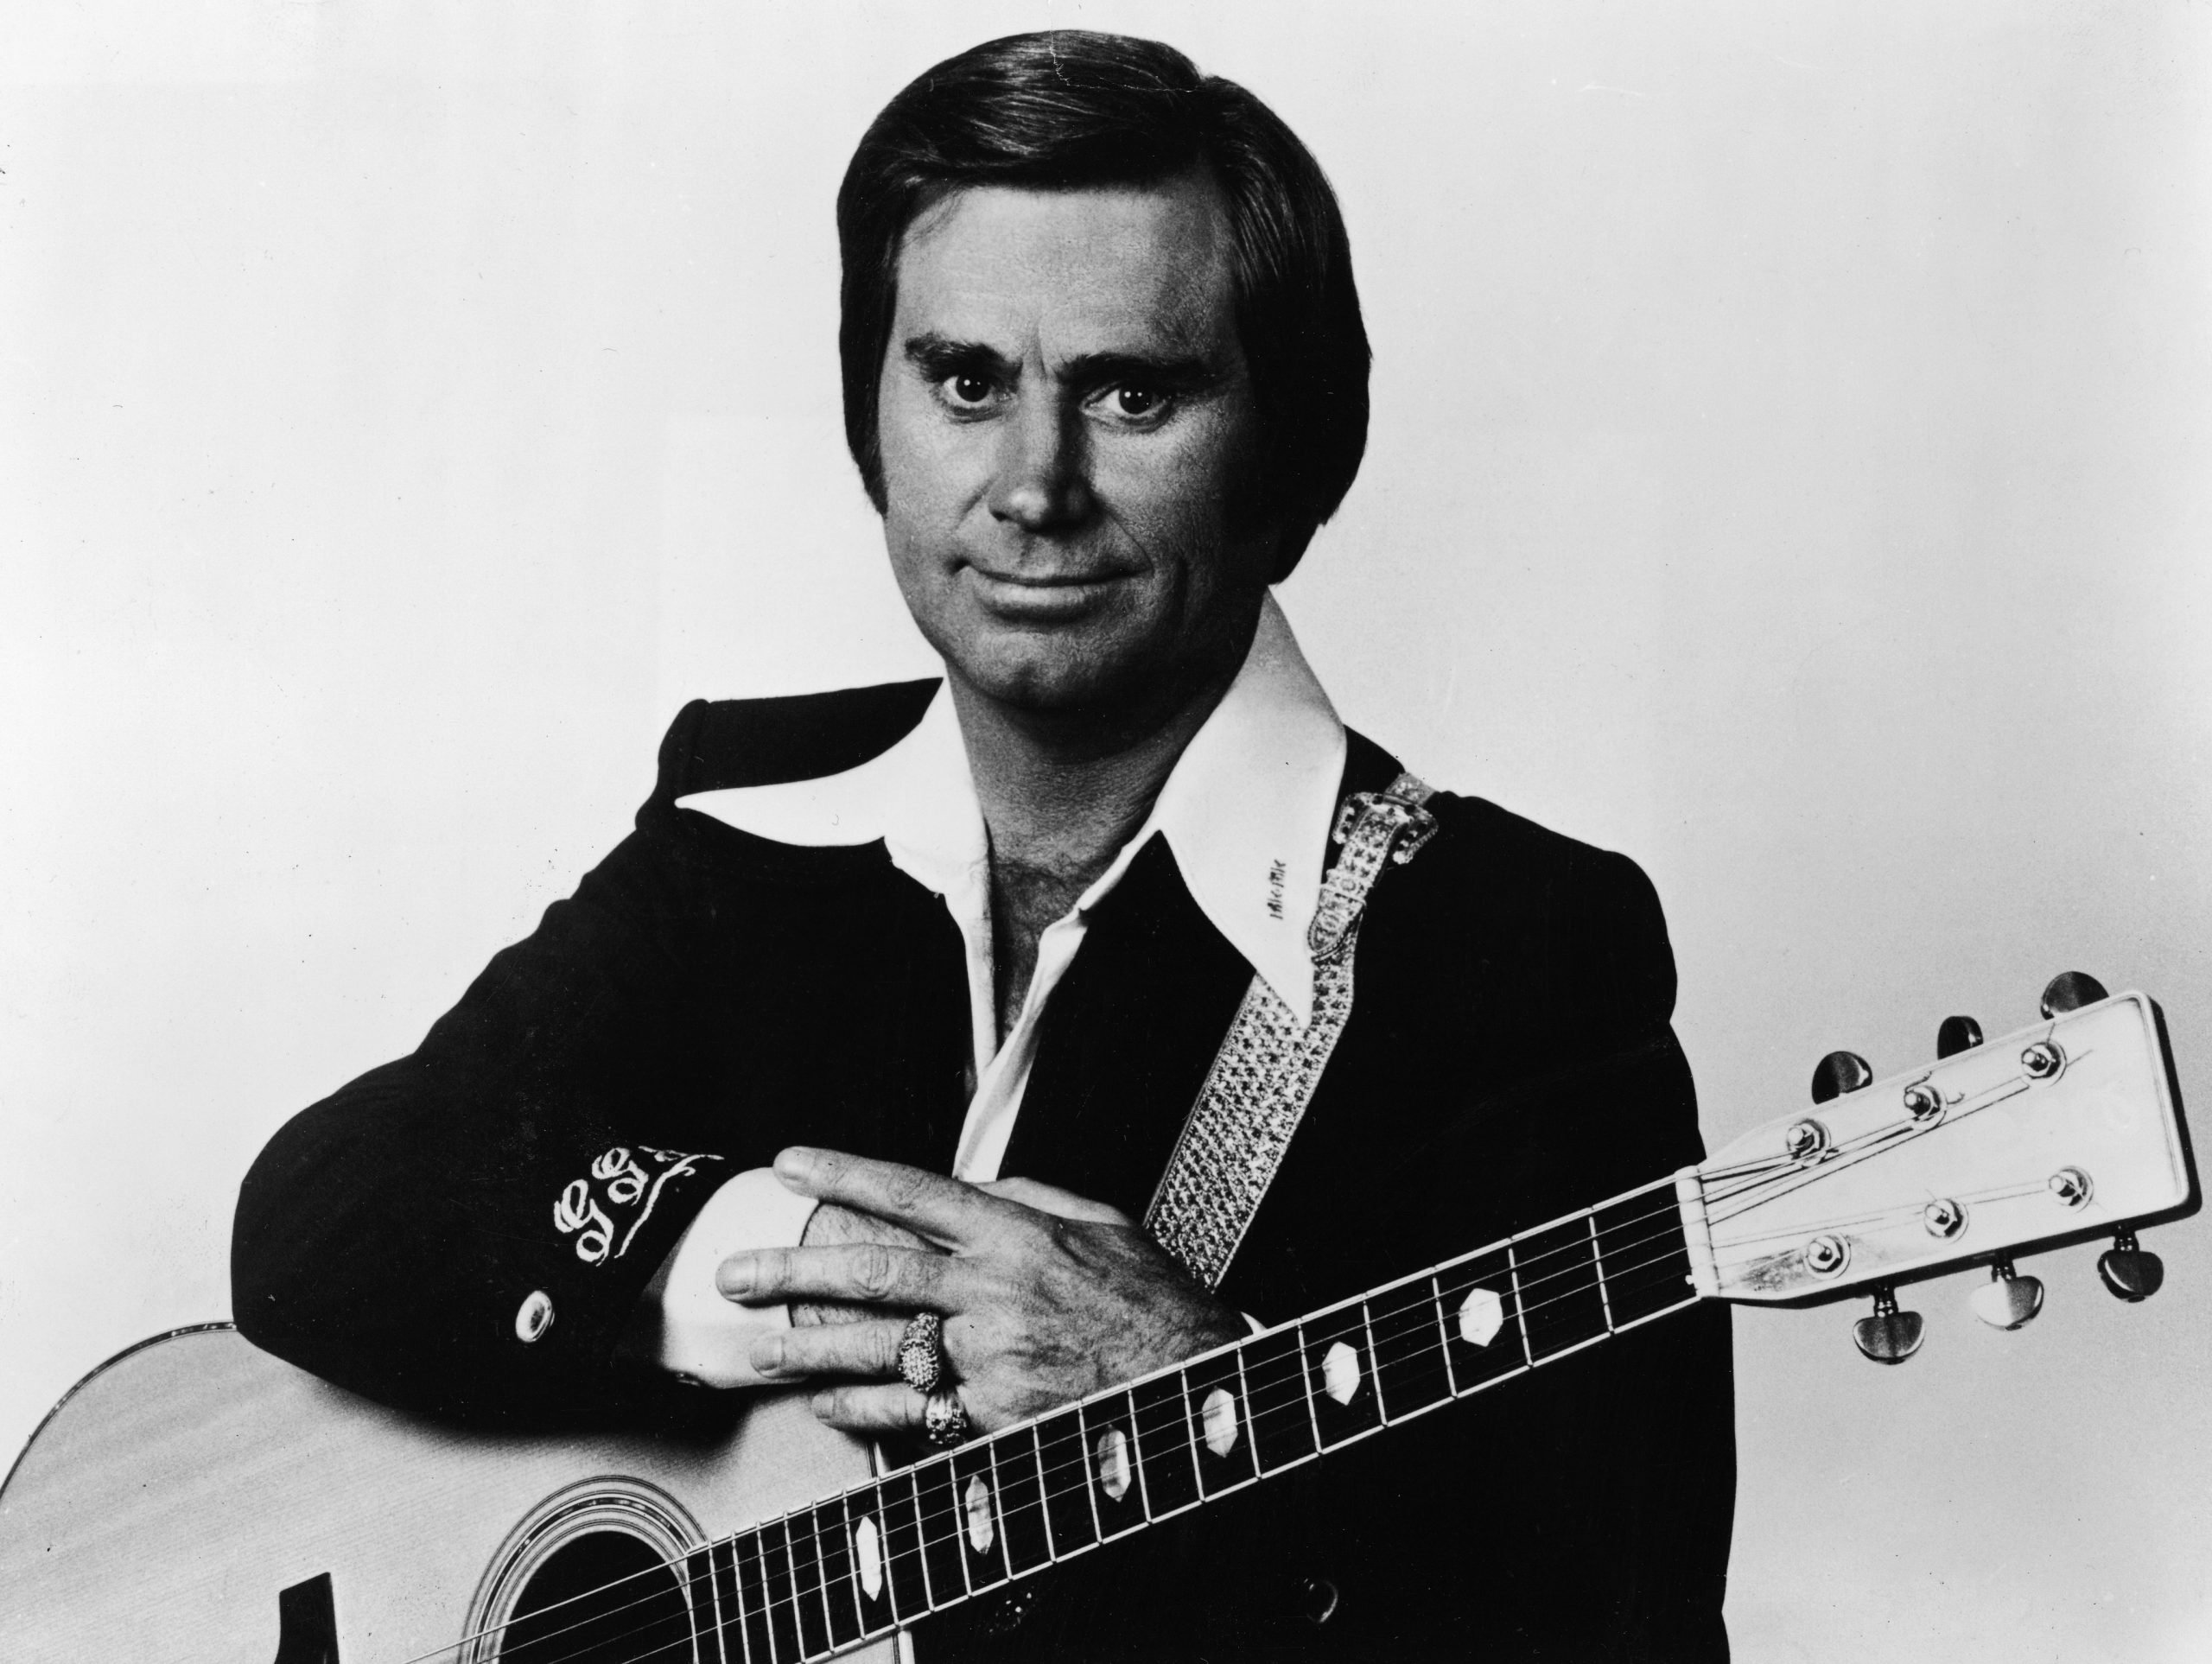 George Jones, who once rode a lawnmower to a liquor store, pictured with an acoustic guitar, circa 1970.